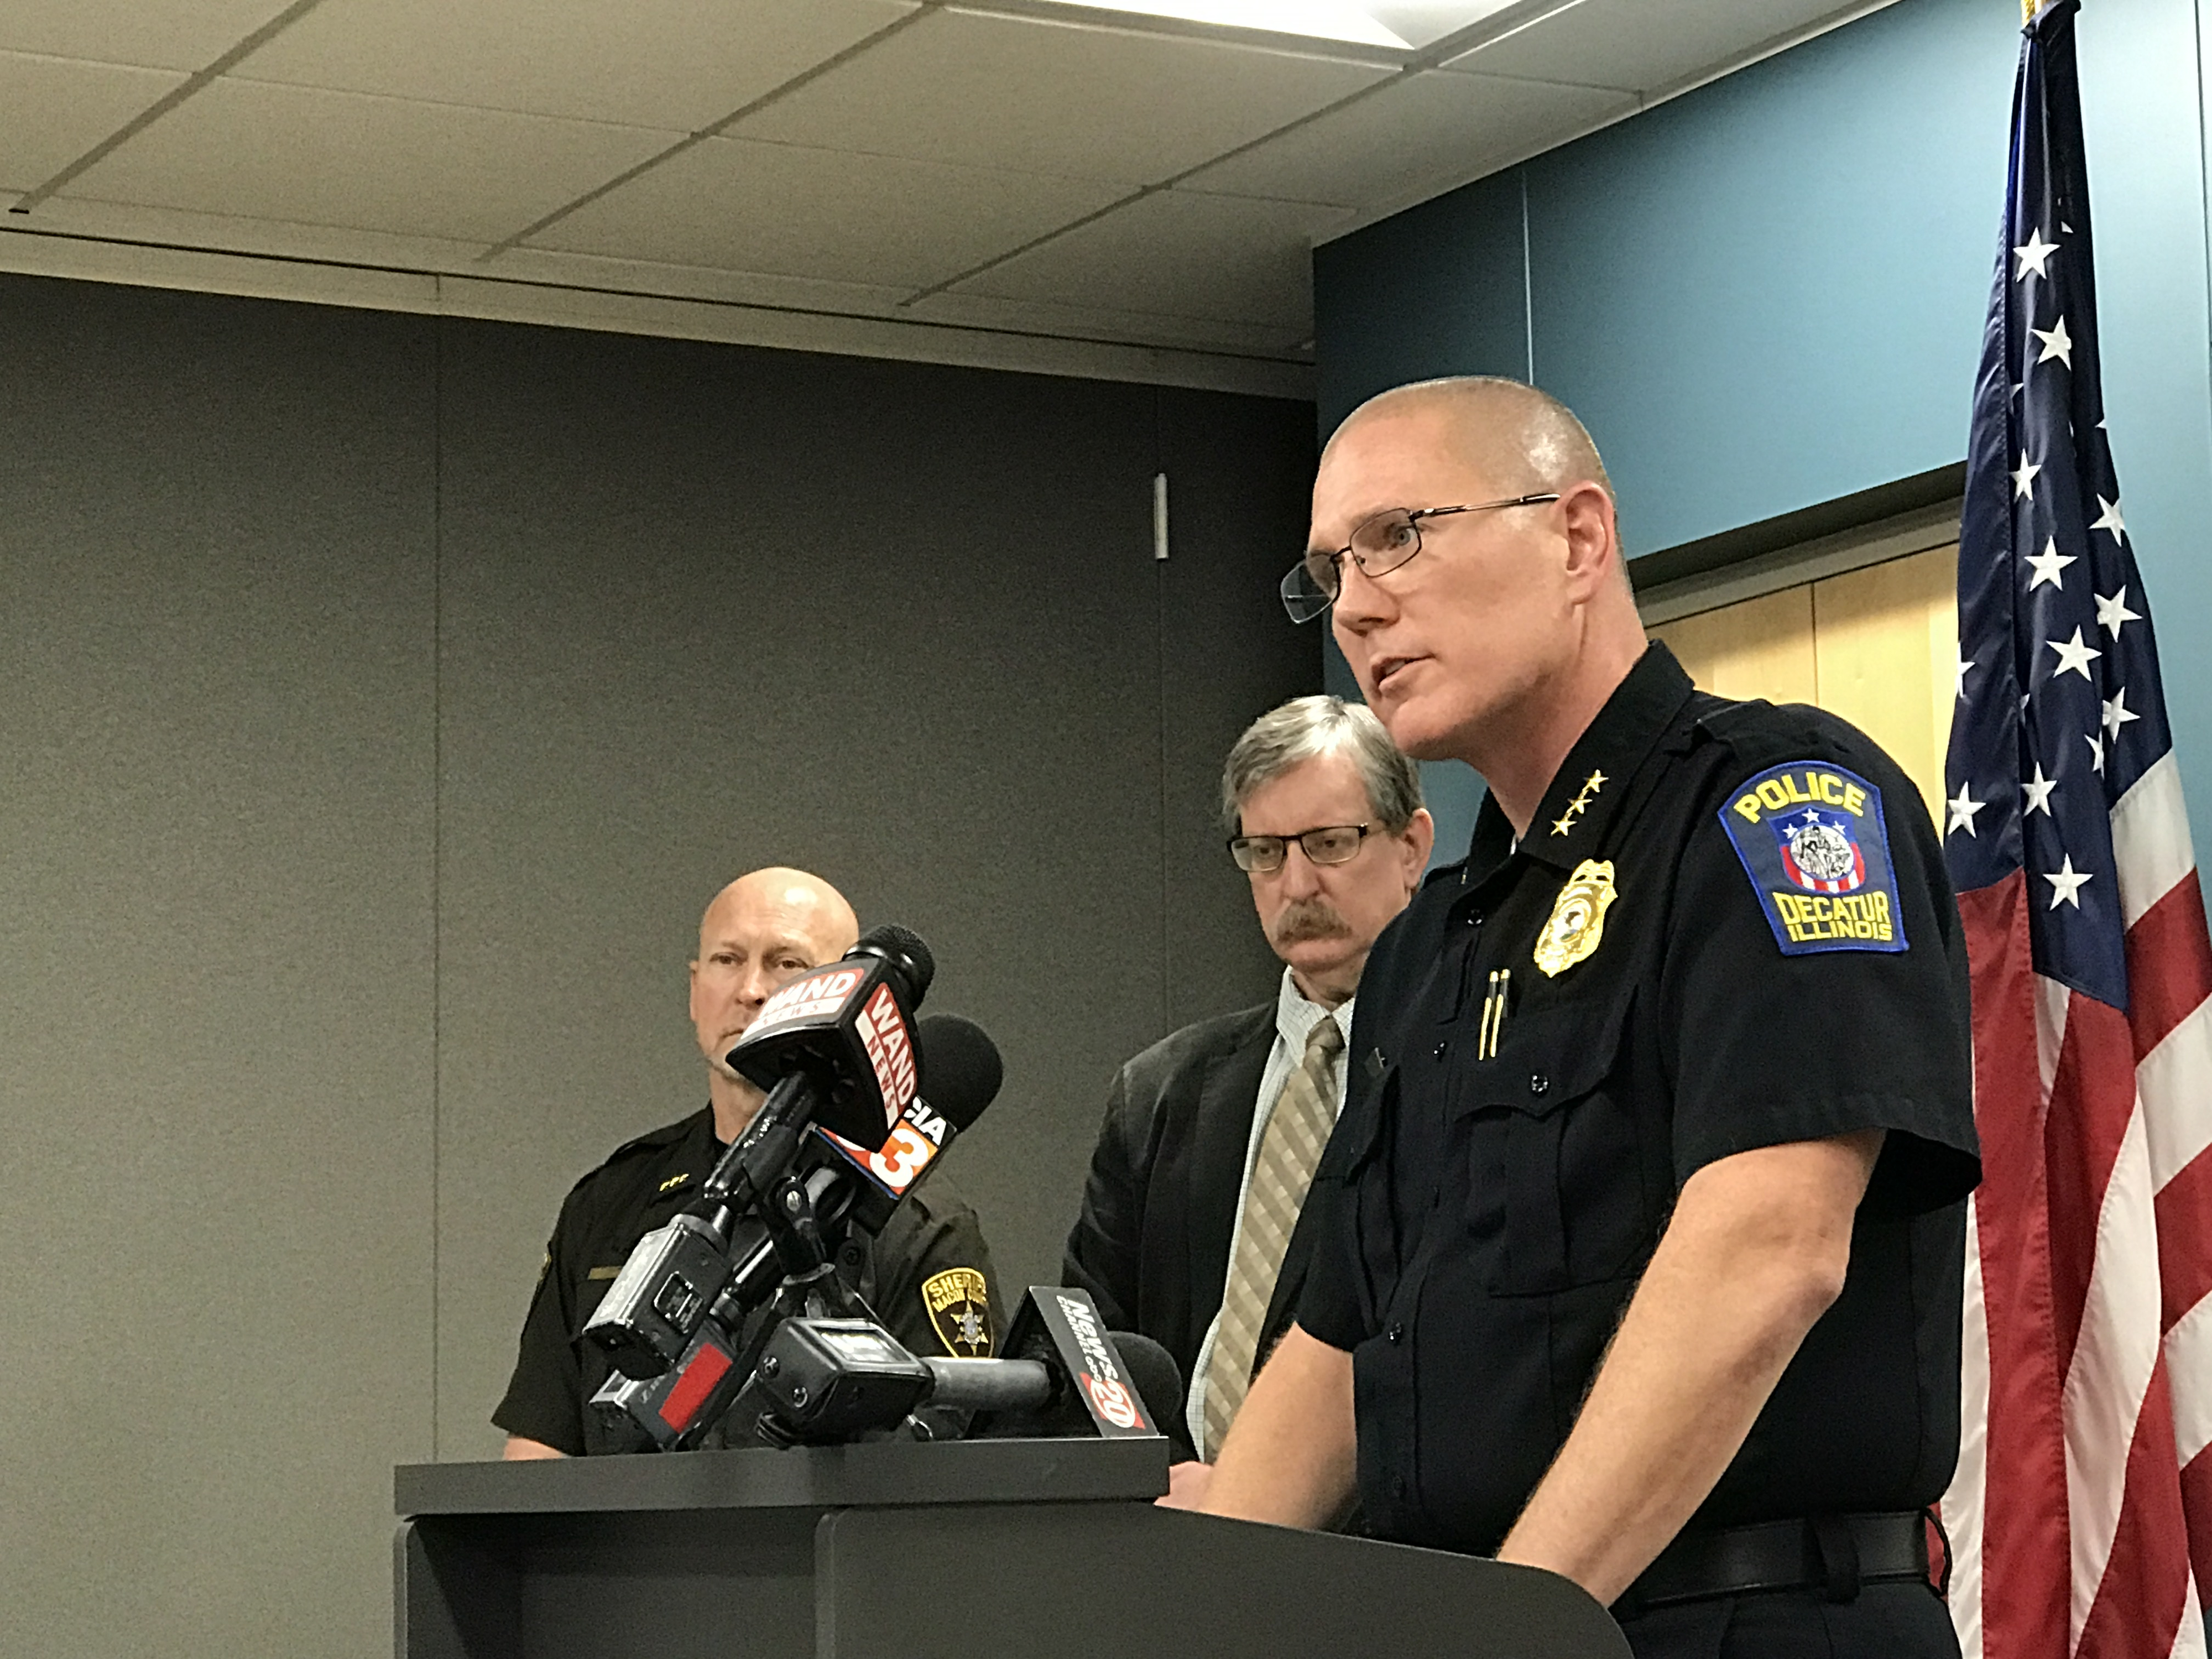 Decatur Police Press Conference - October 12, 2022